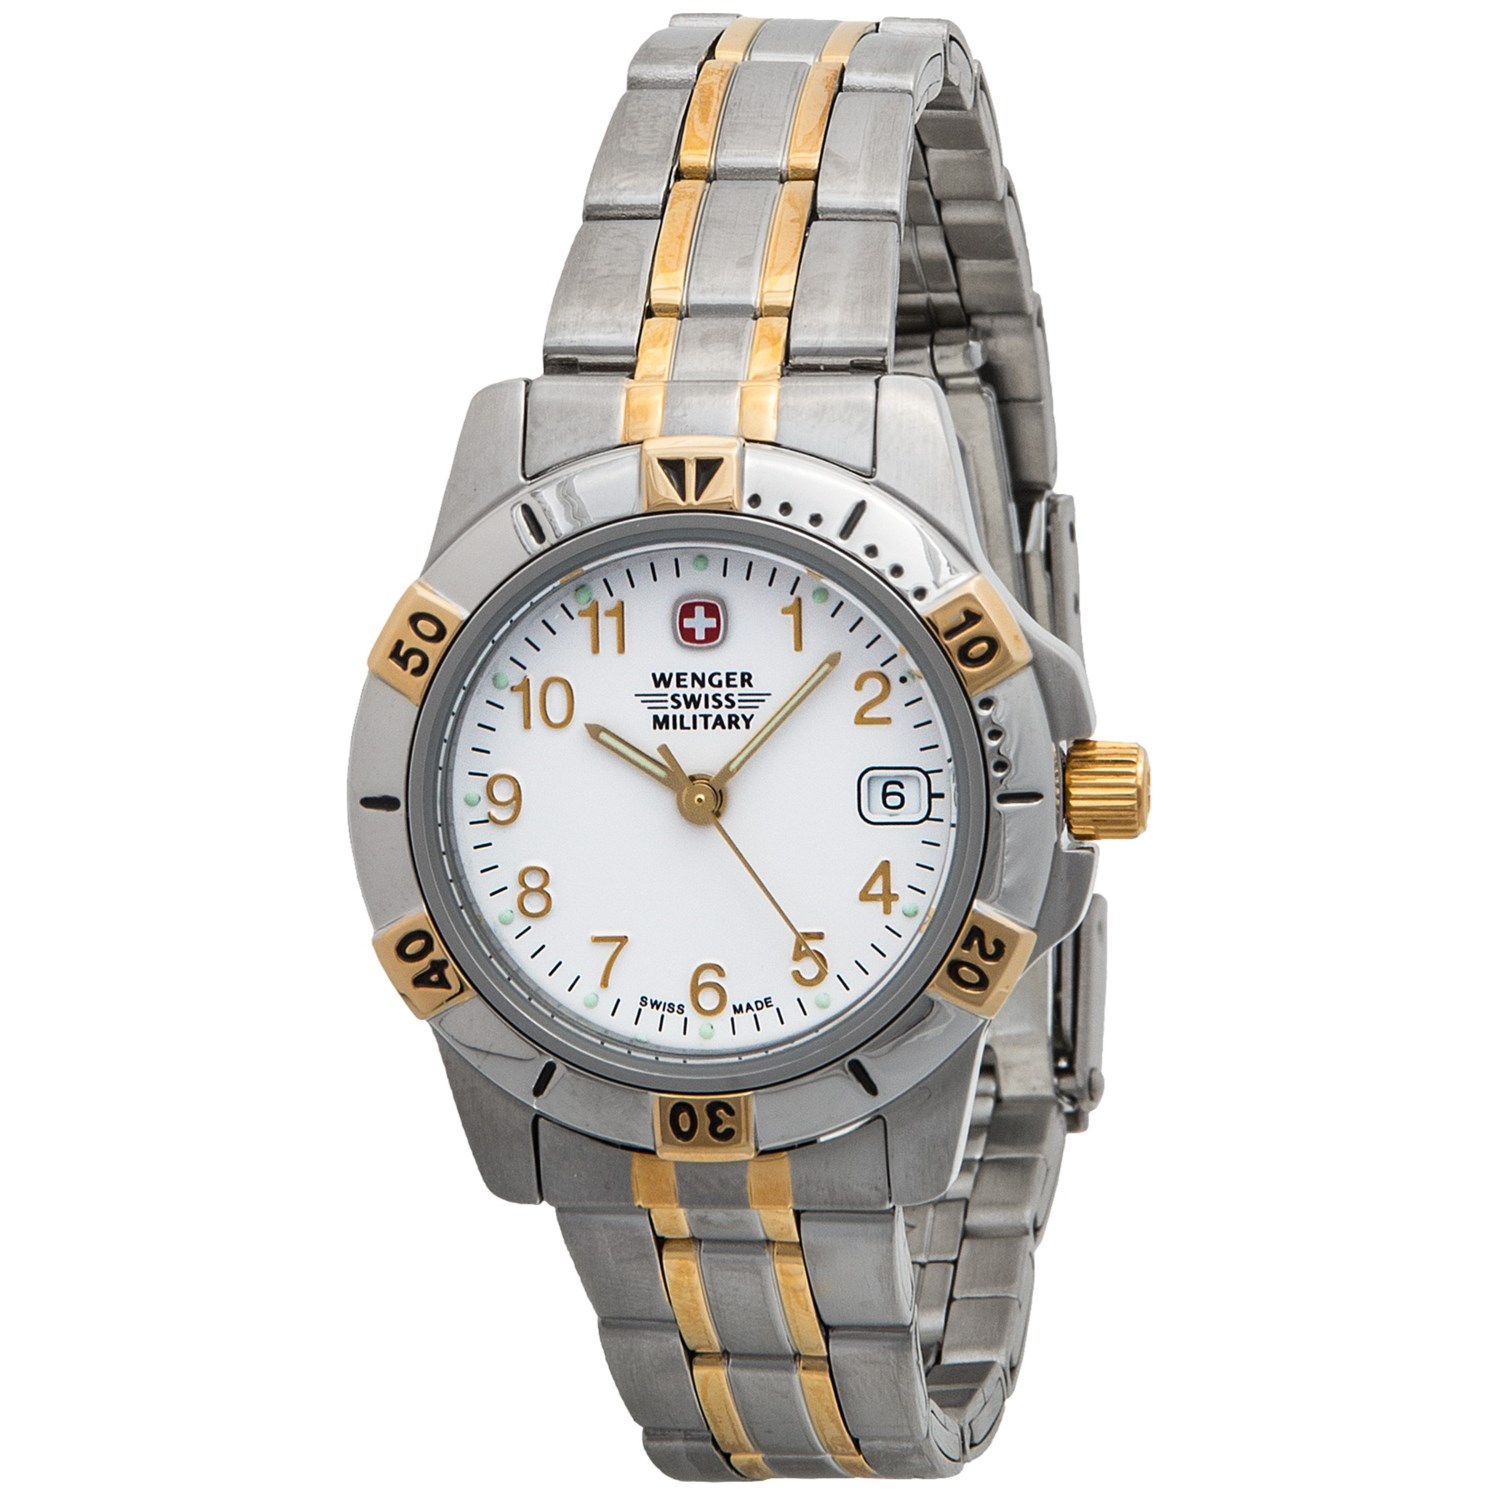 Swiss Army Watches For Women - Army Military